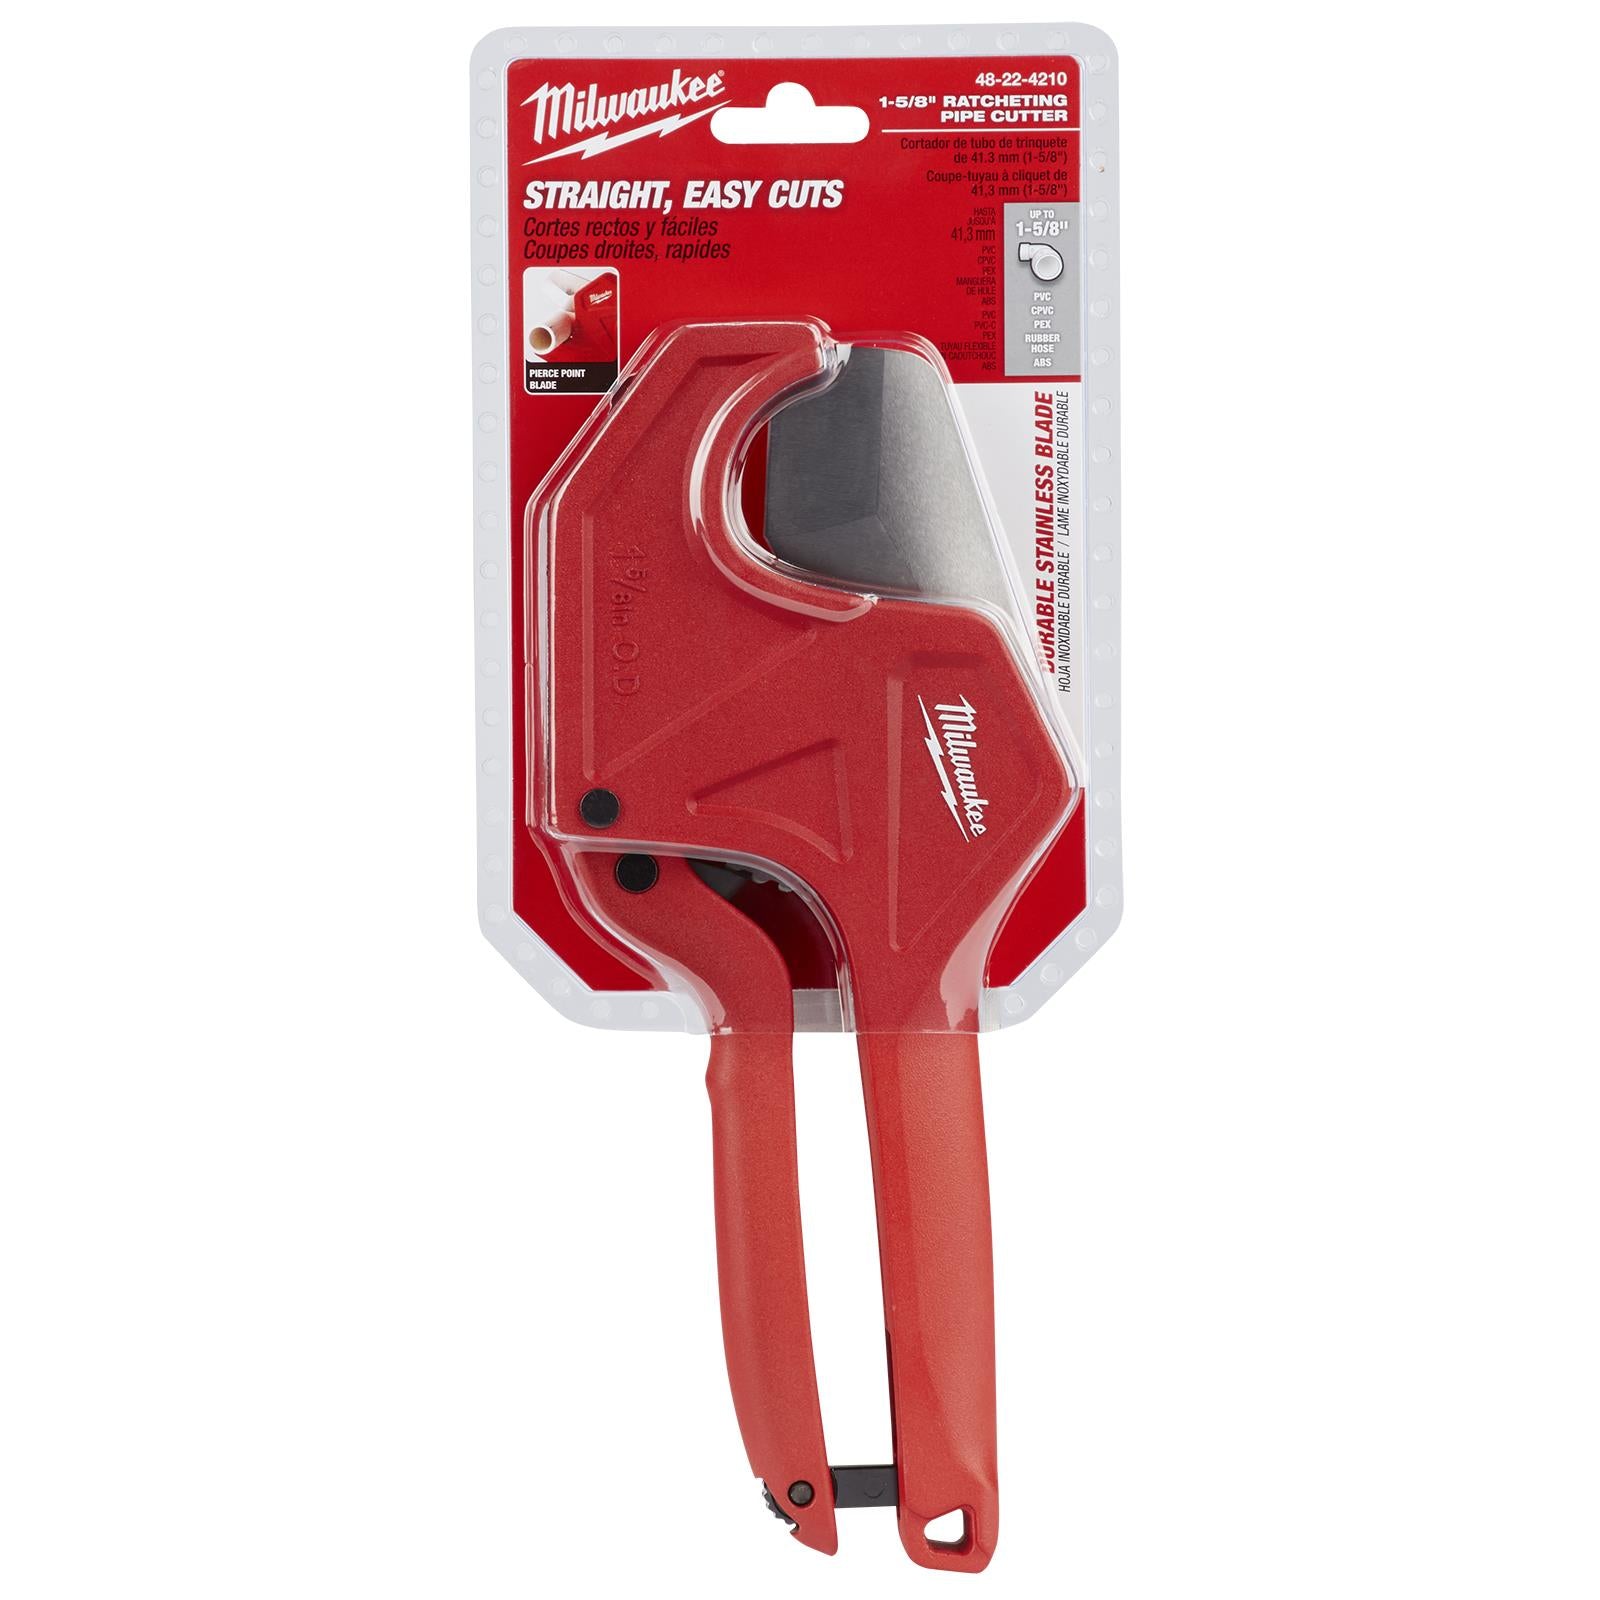 Milwaukee Electrician Scissor with Tool Holder Belt Pouch